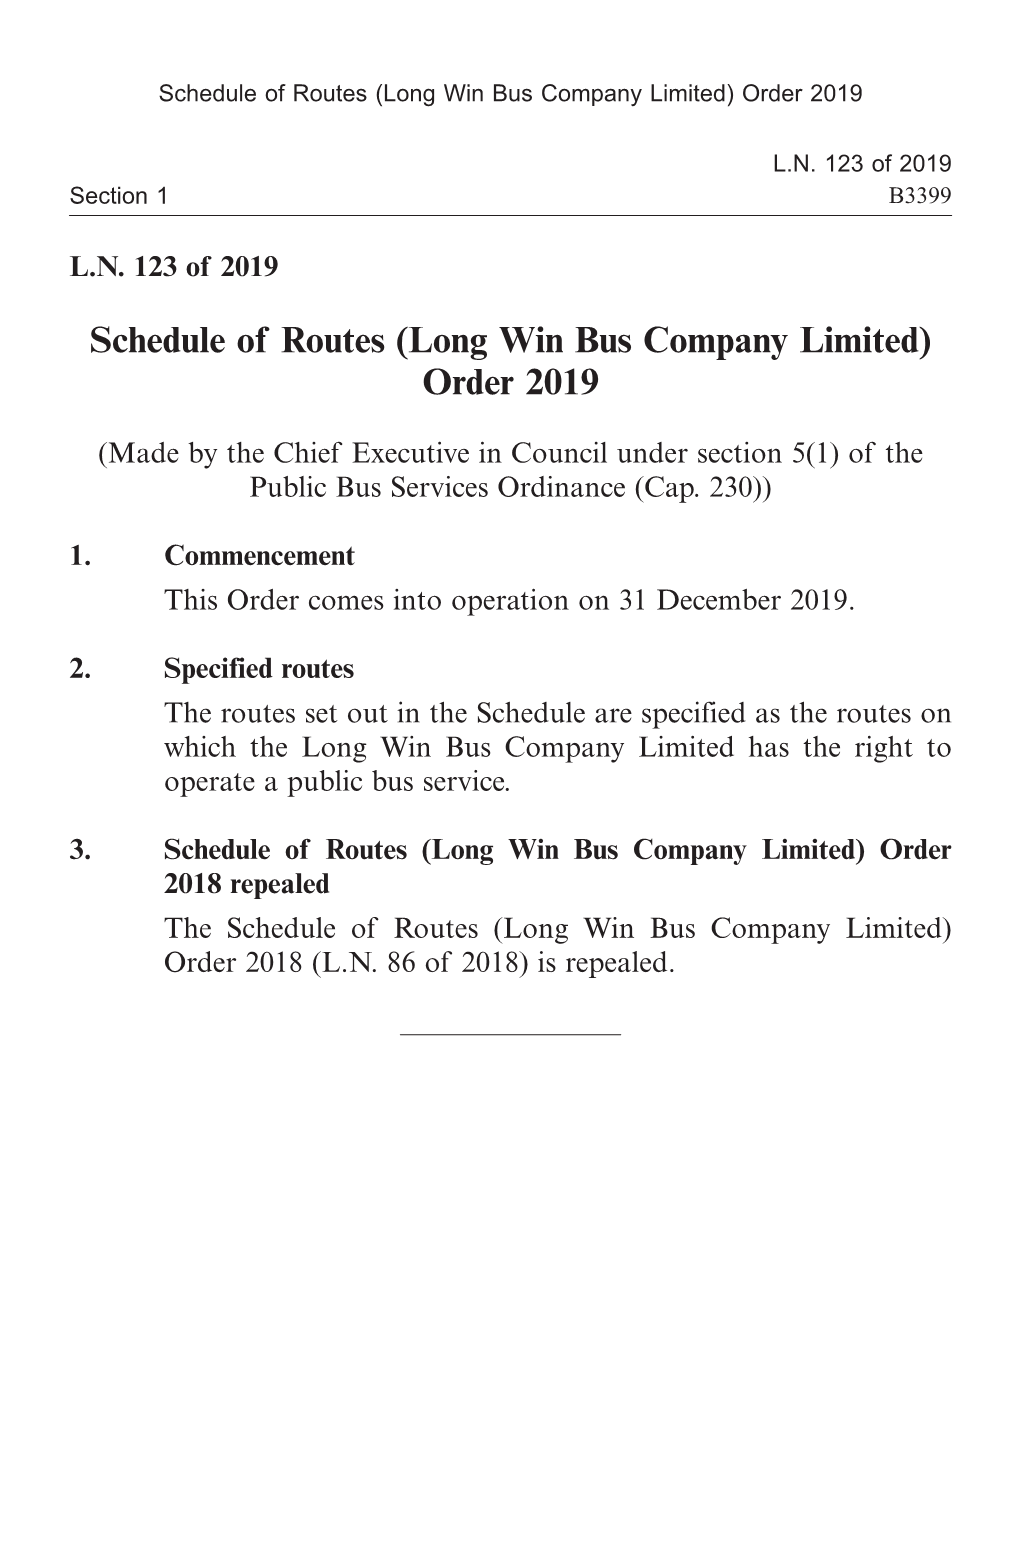 Schedule of Routes (Long Win Bus Company Limited) Order 2019